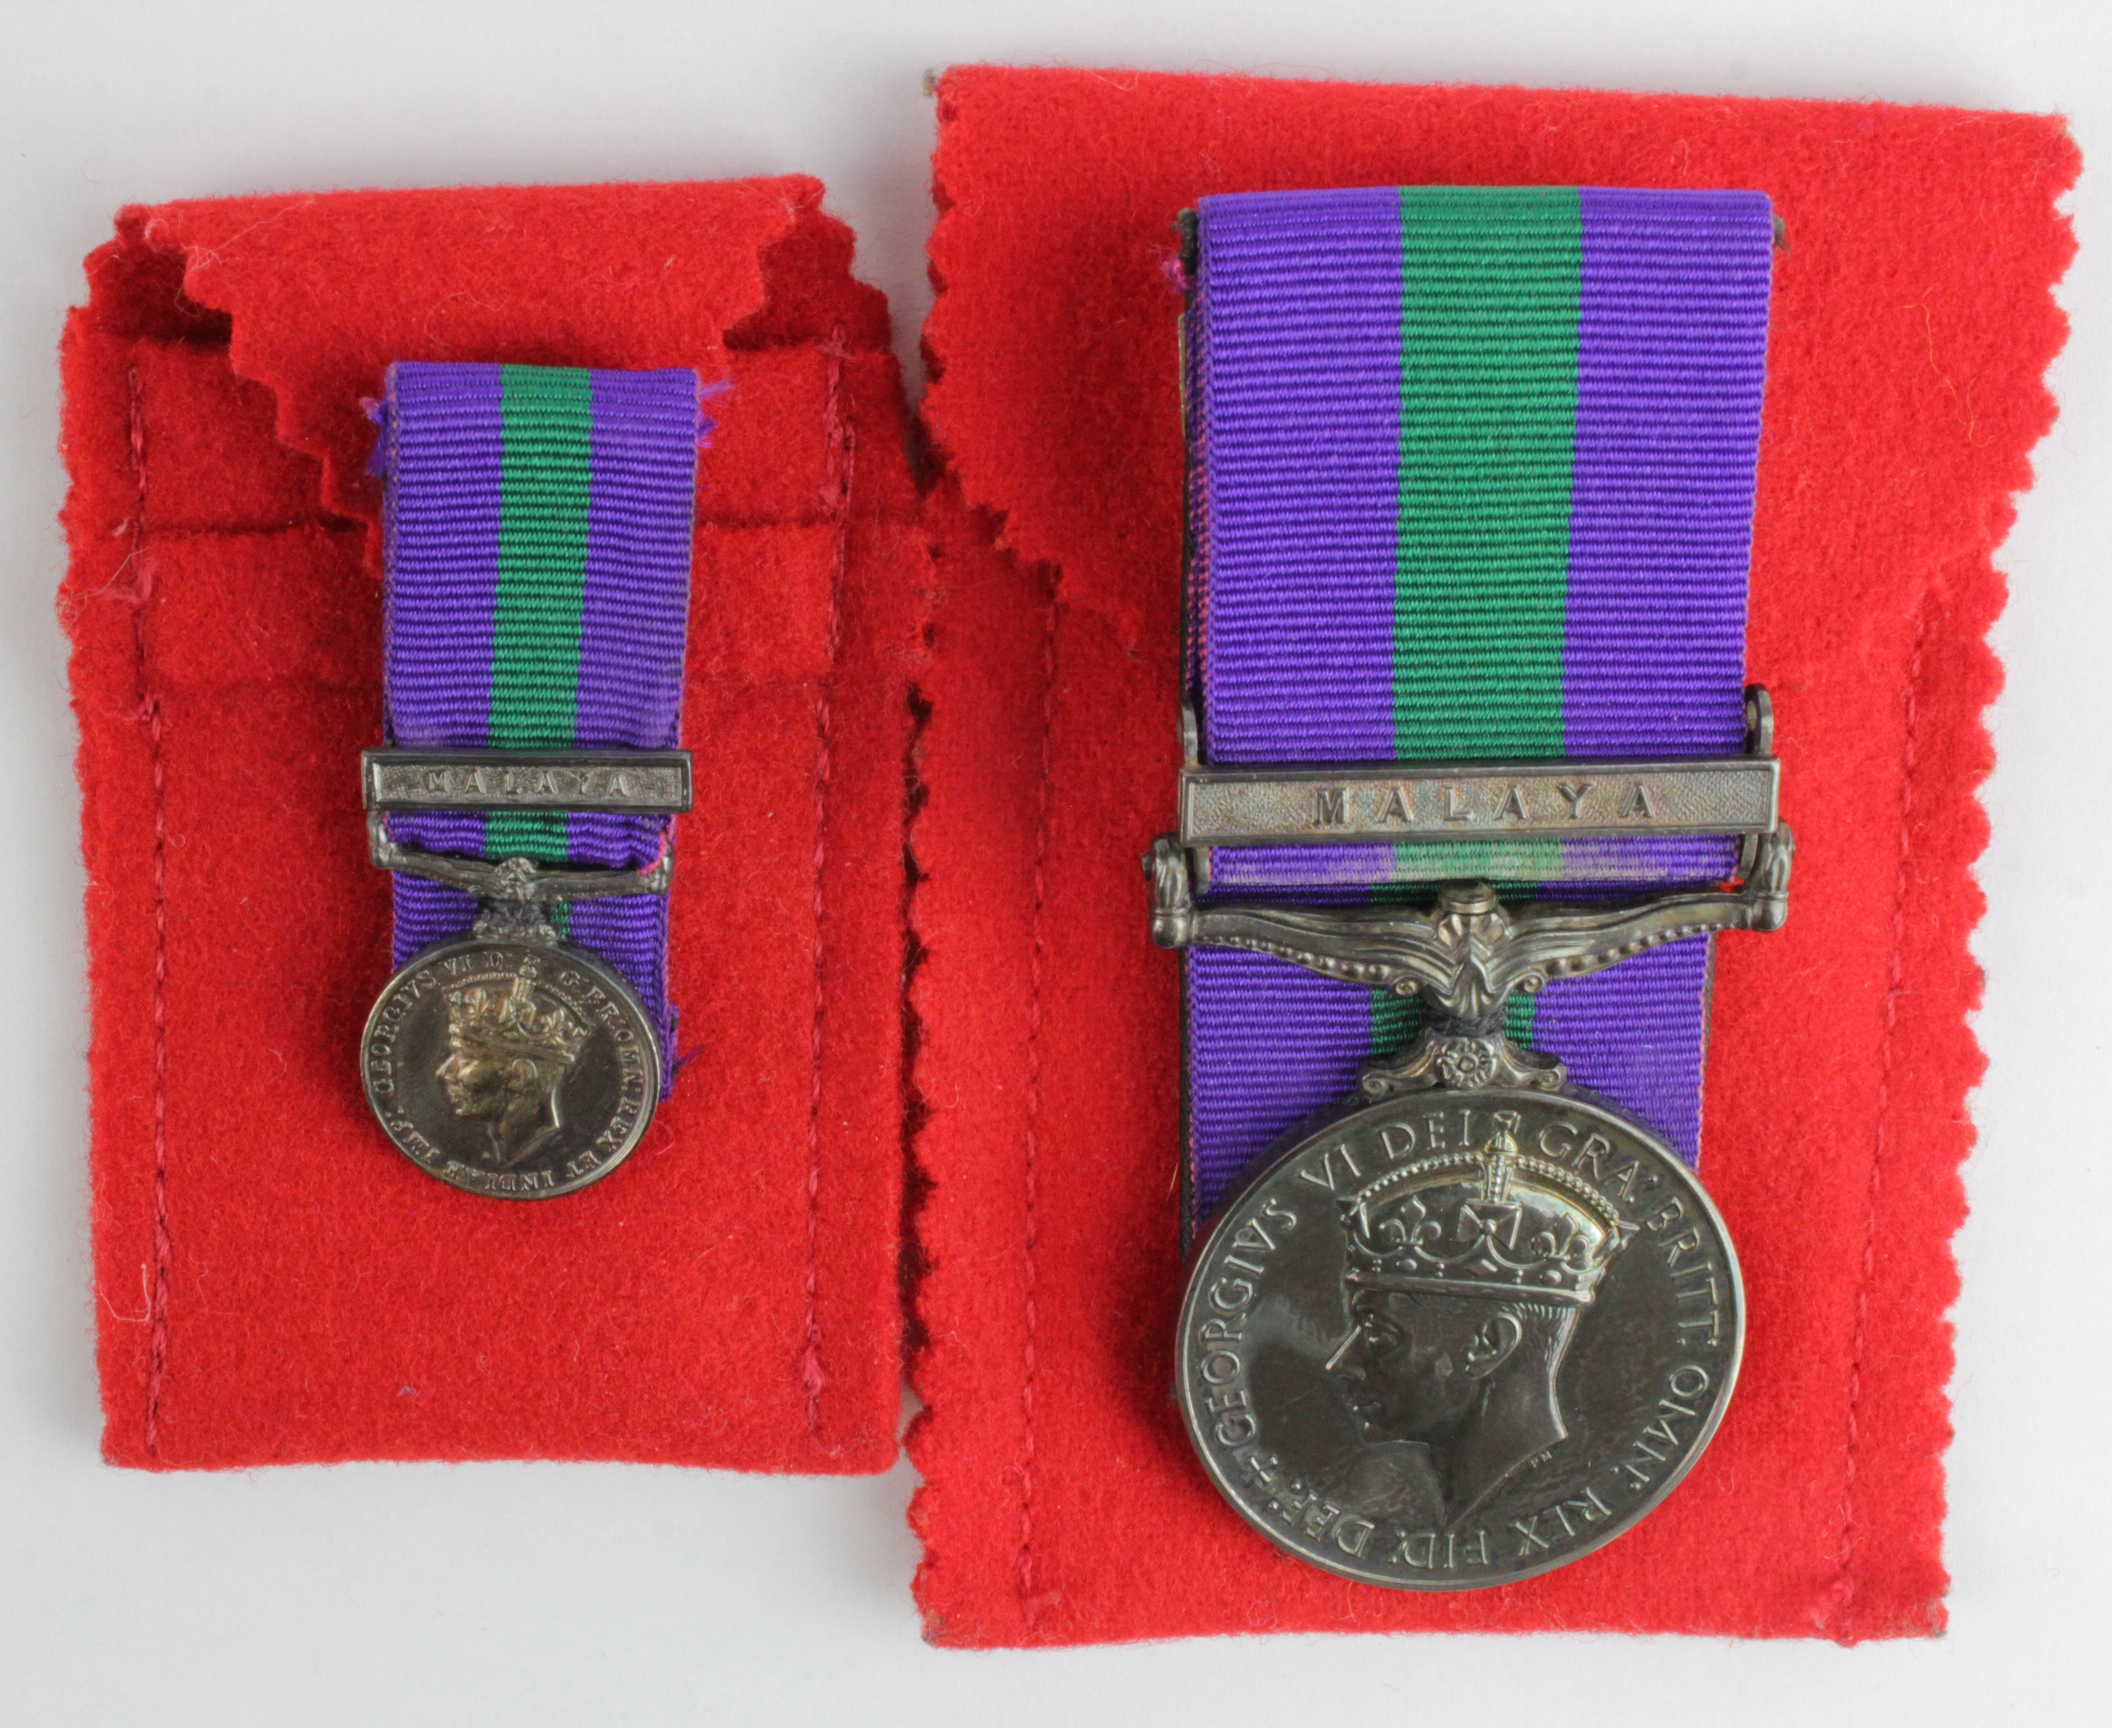 GSM GVI with Malaya clasp named (22214274 Gdsm H Cole Coldm Gds), with matching miniature. (2)